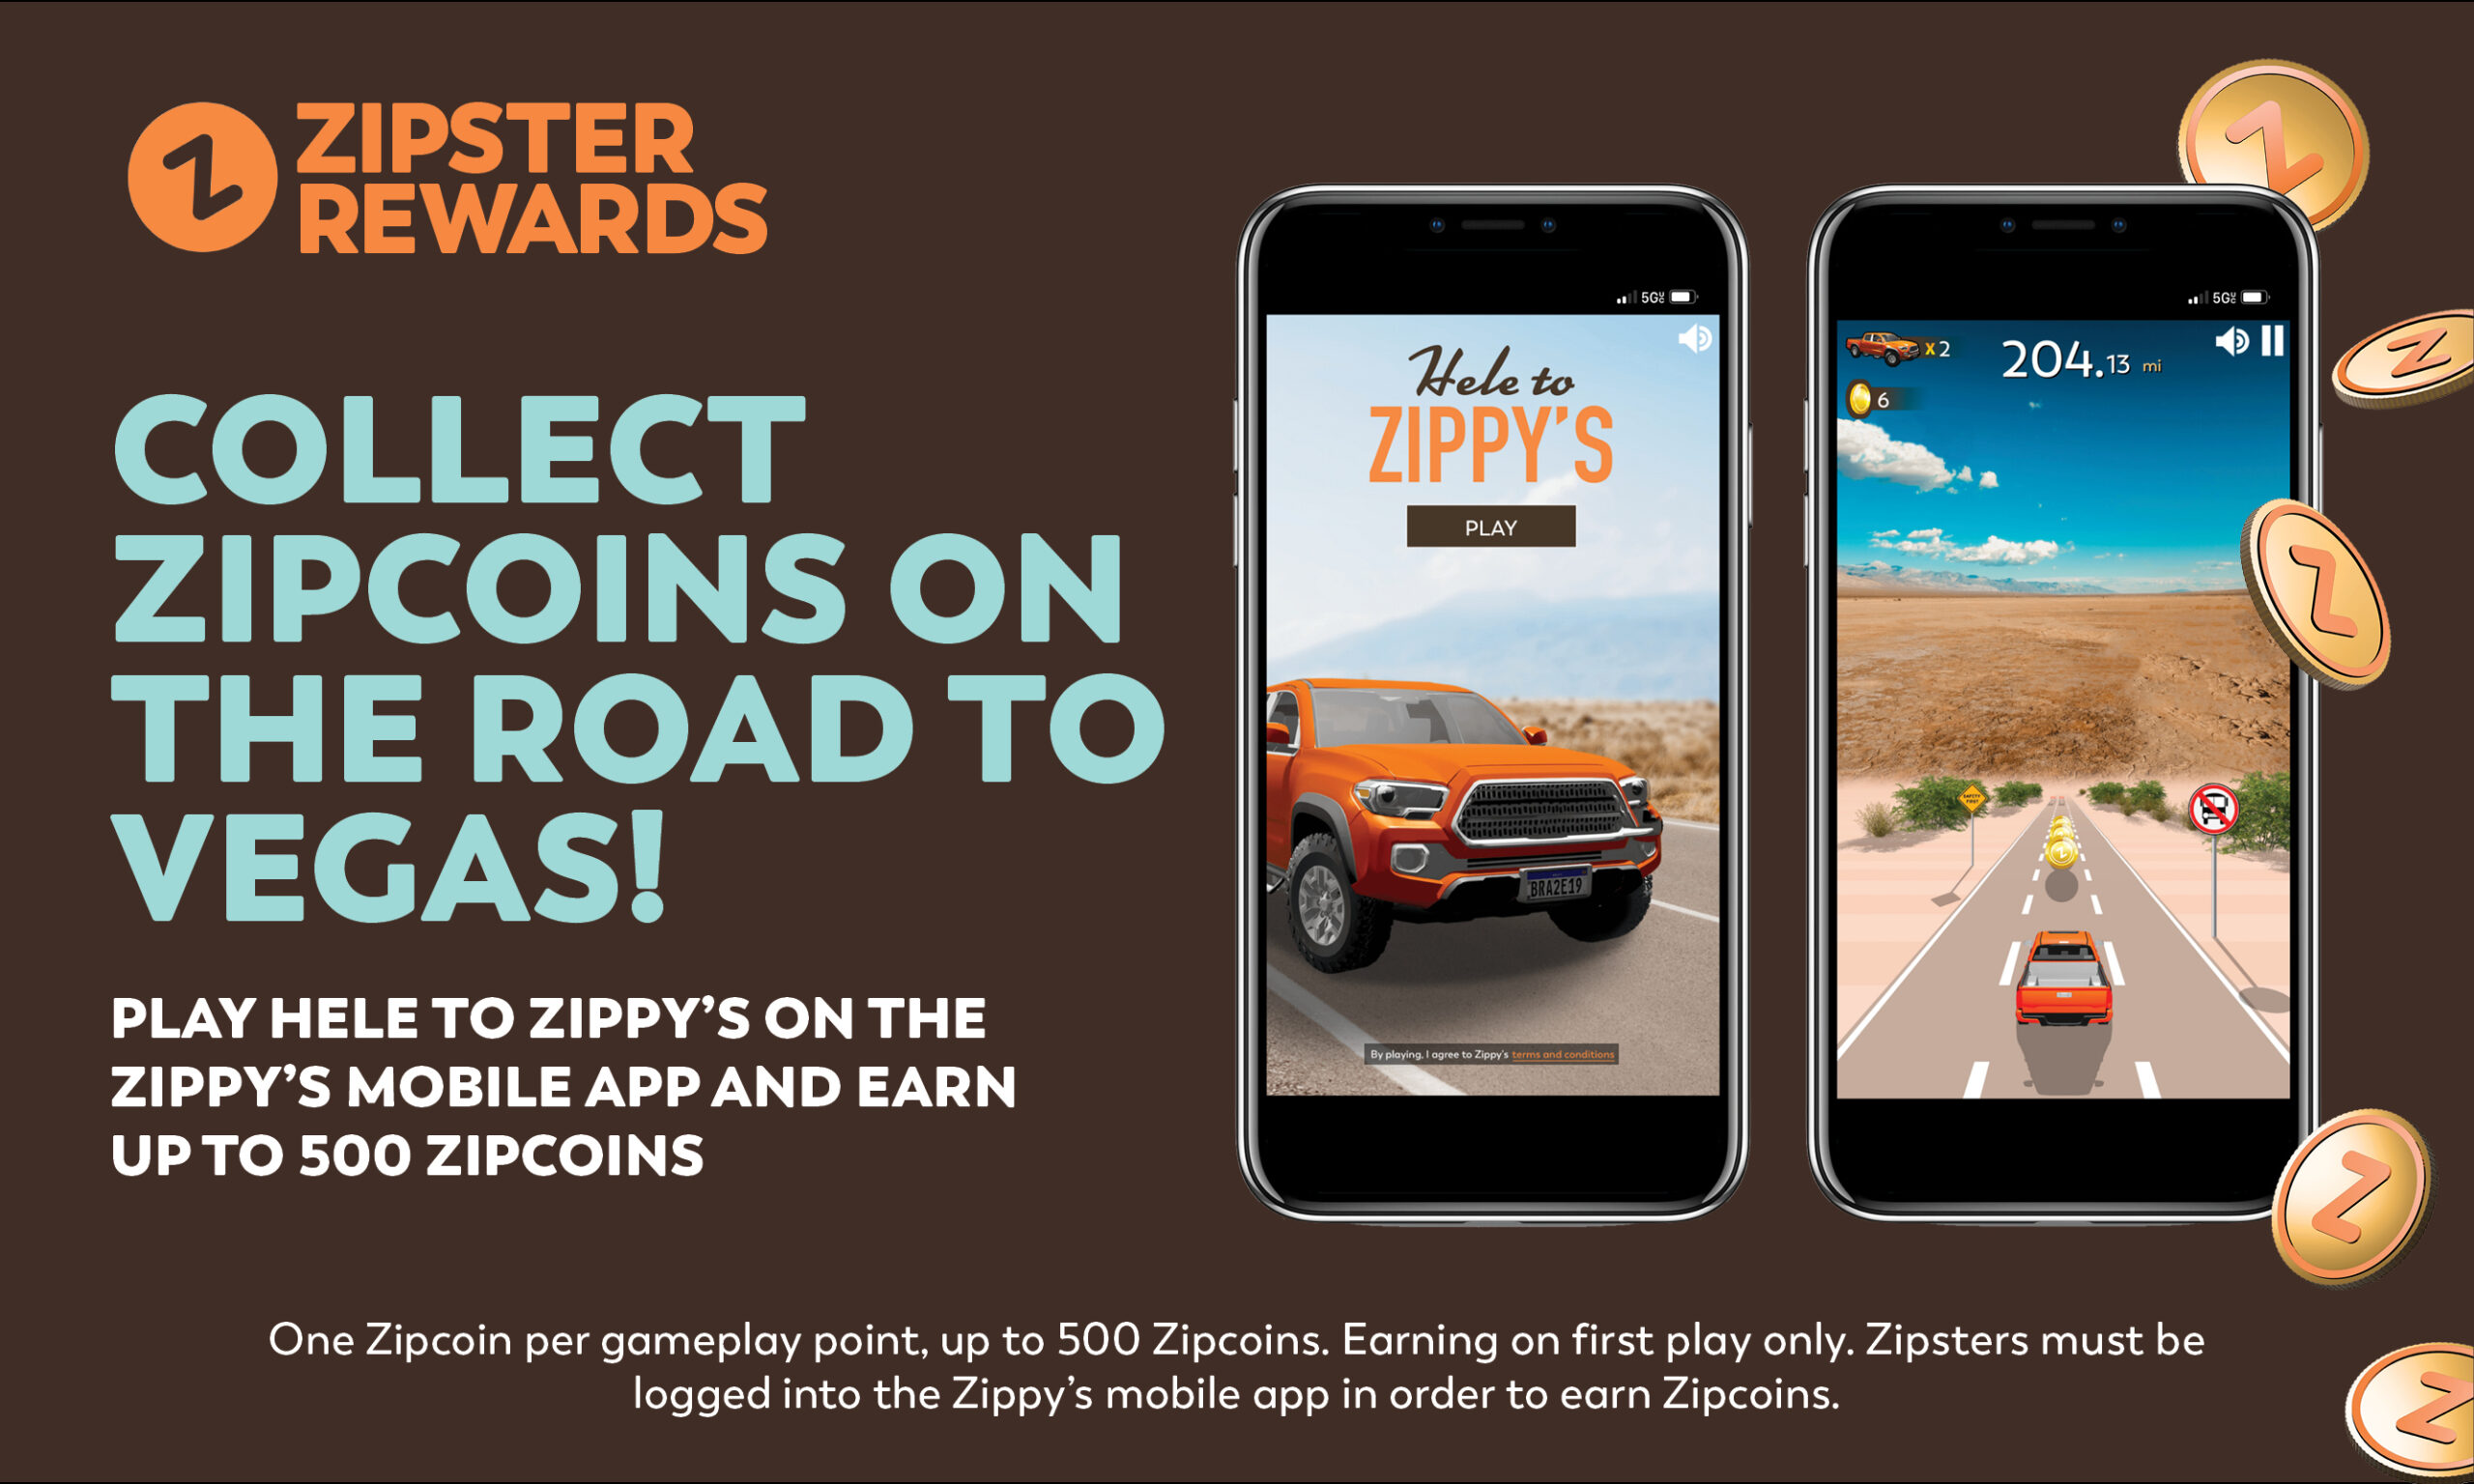 Collect Zipcoins on the road to Vegas!